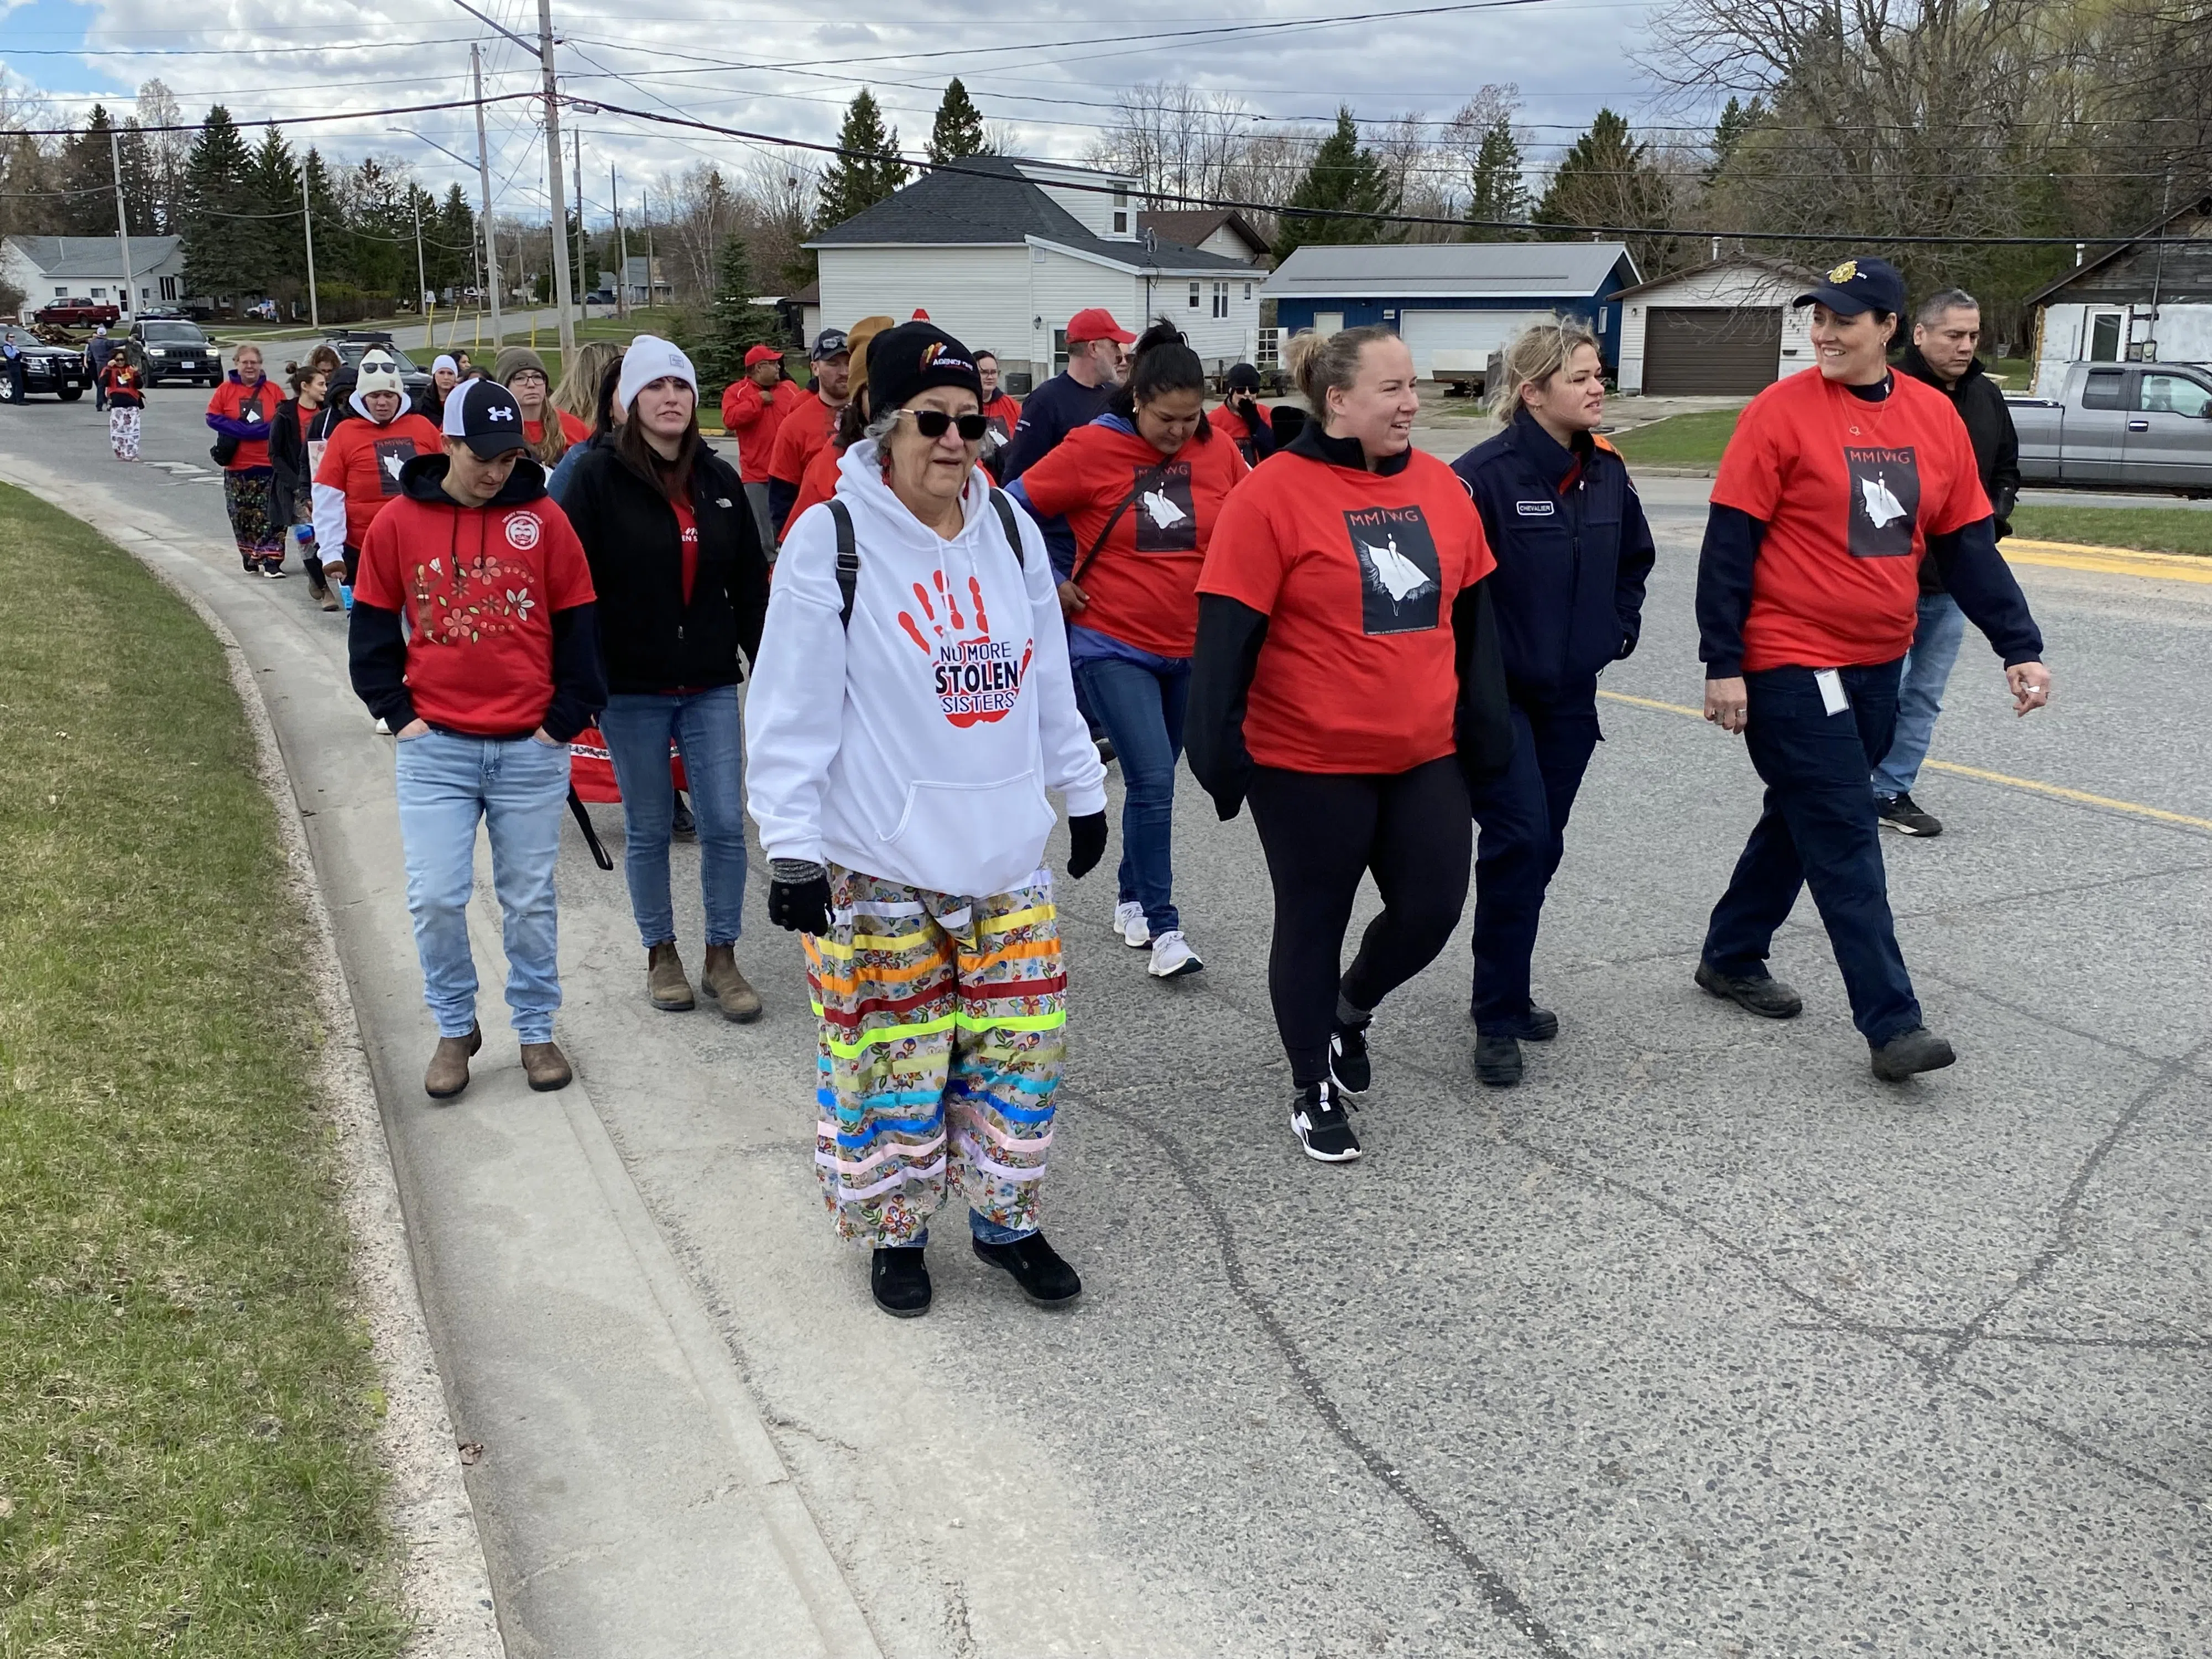 Awareness walk for Missing and Murdered Indigenous Women and Girls